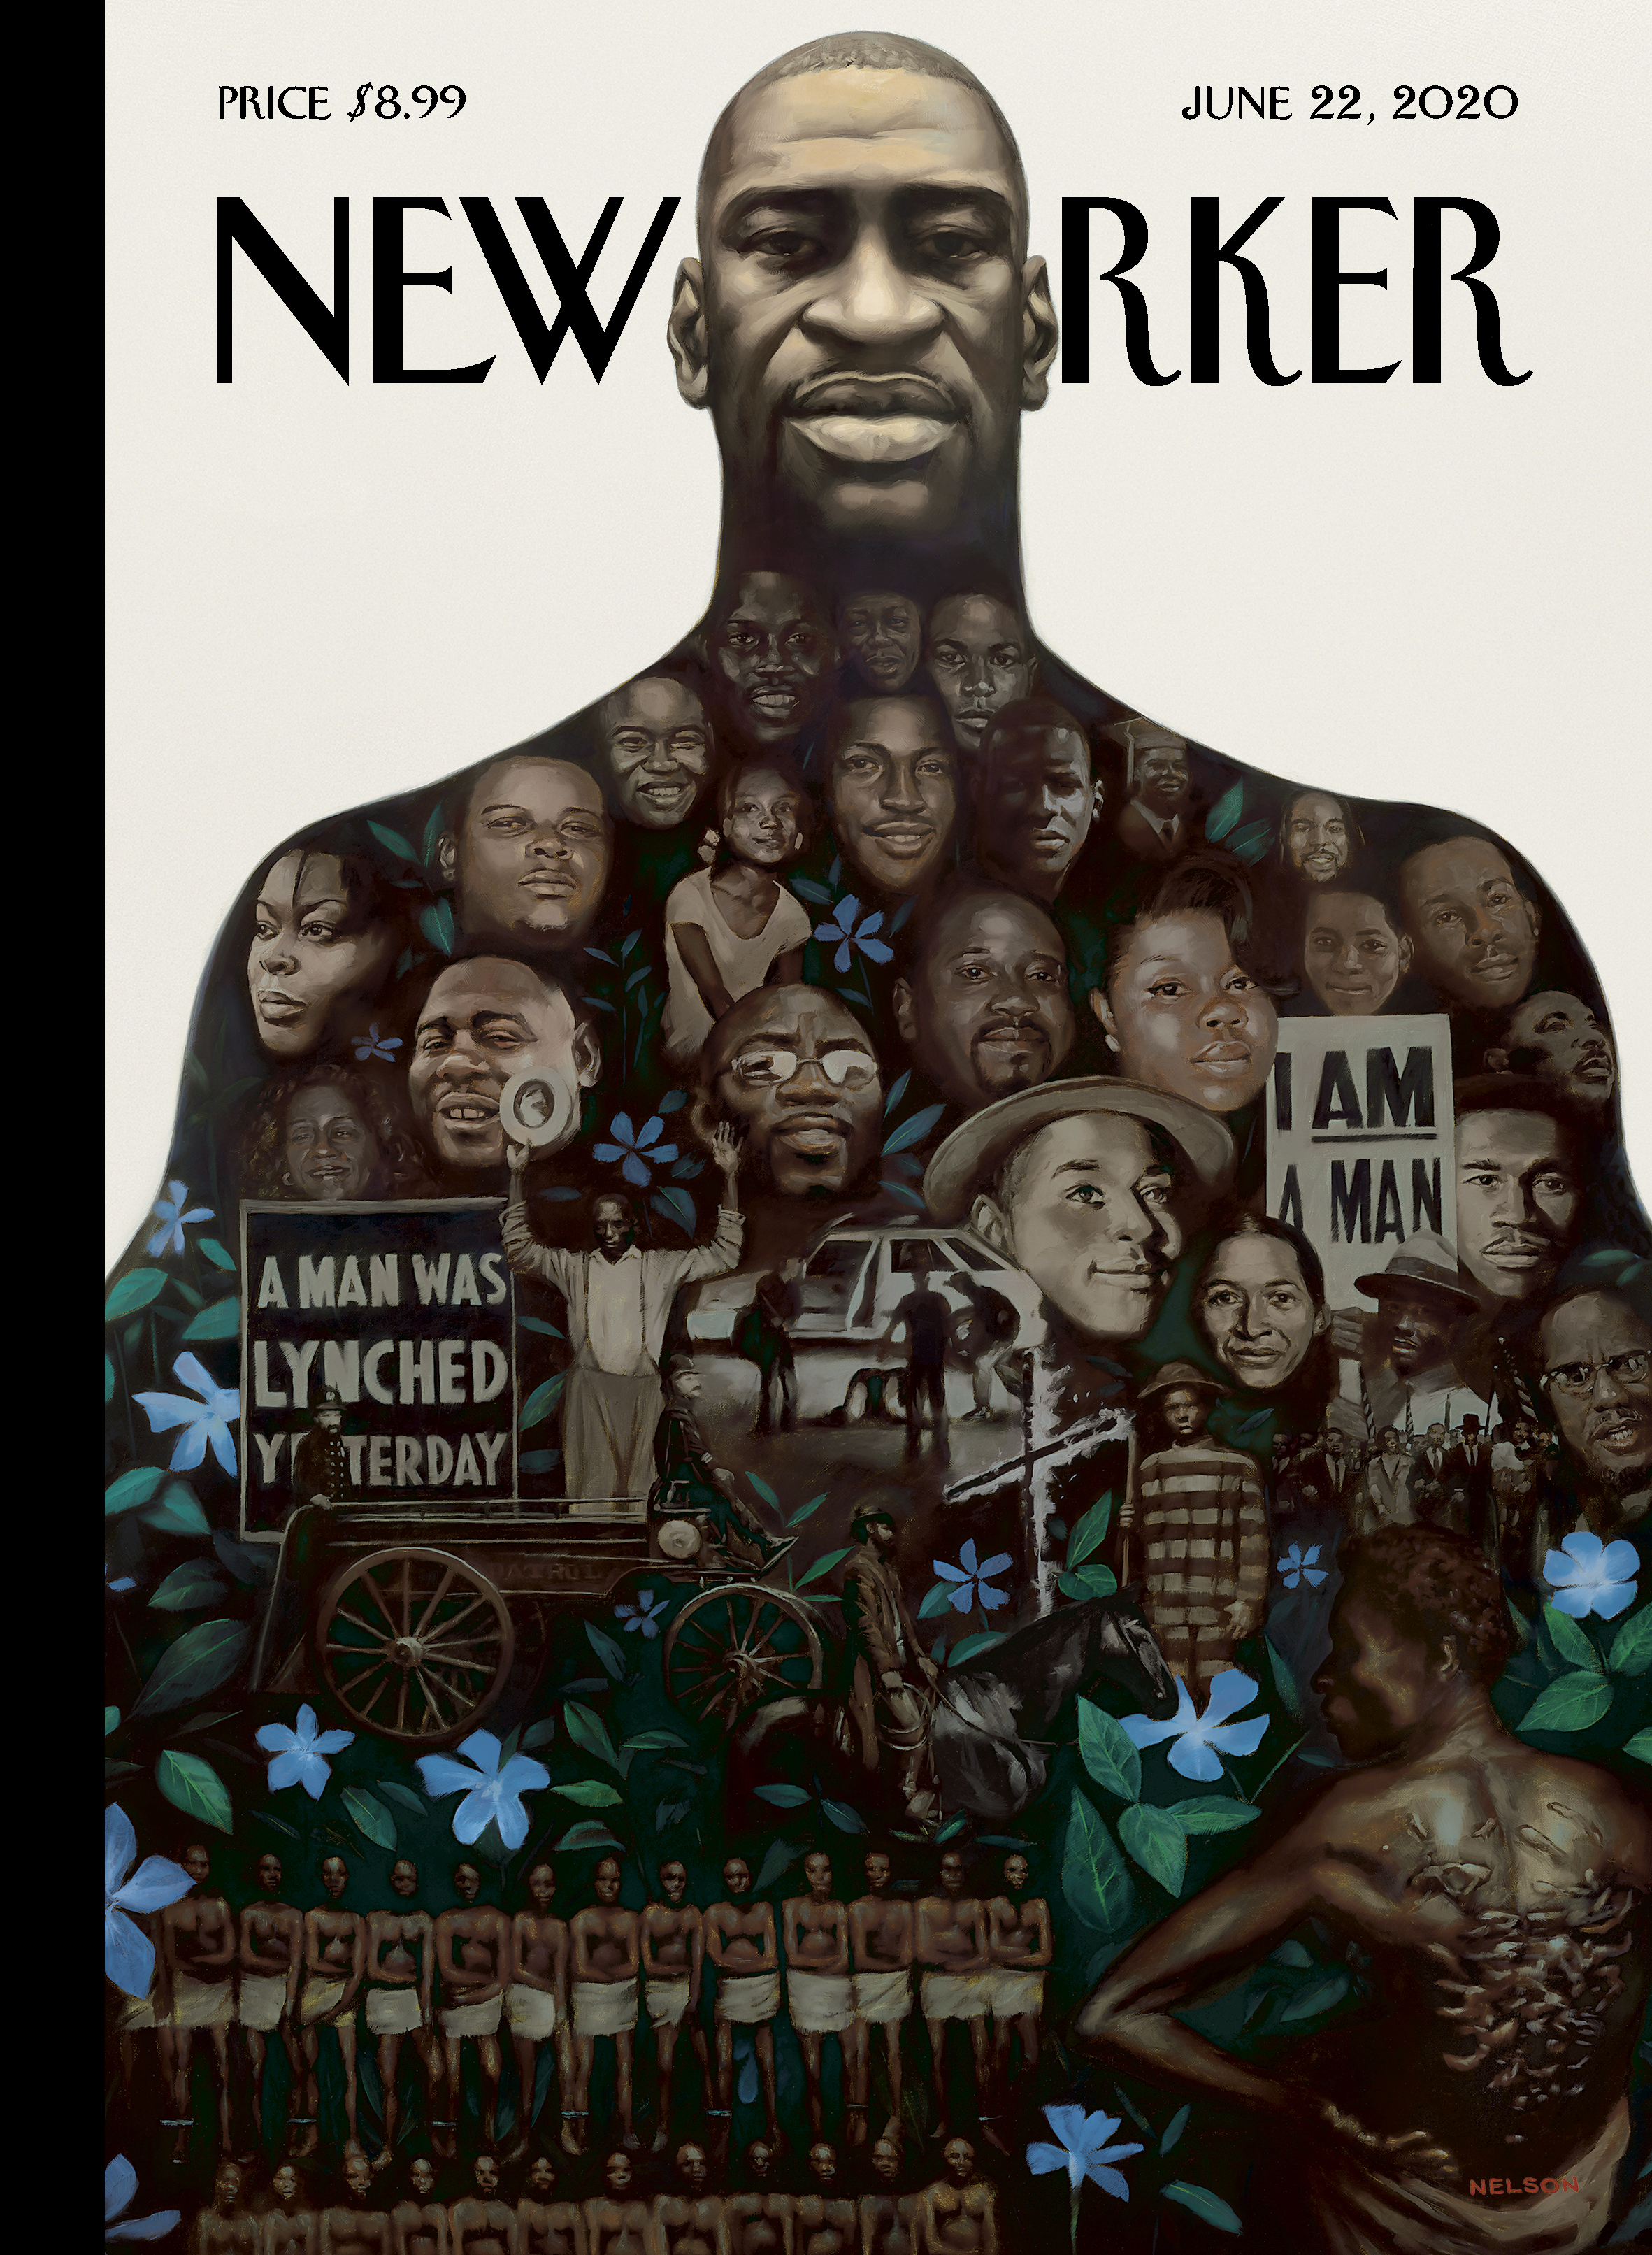 The New Yorker - "Say Their Names," June 22, 2020